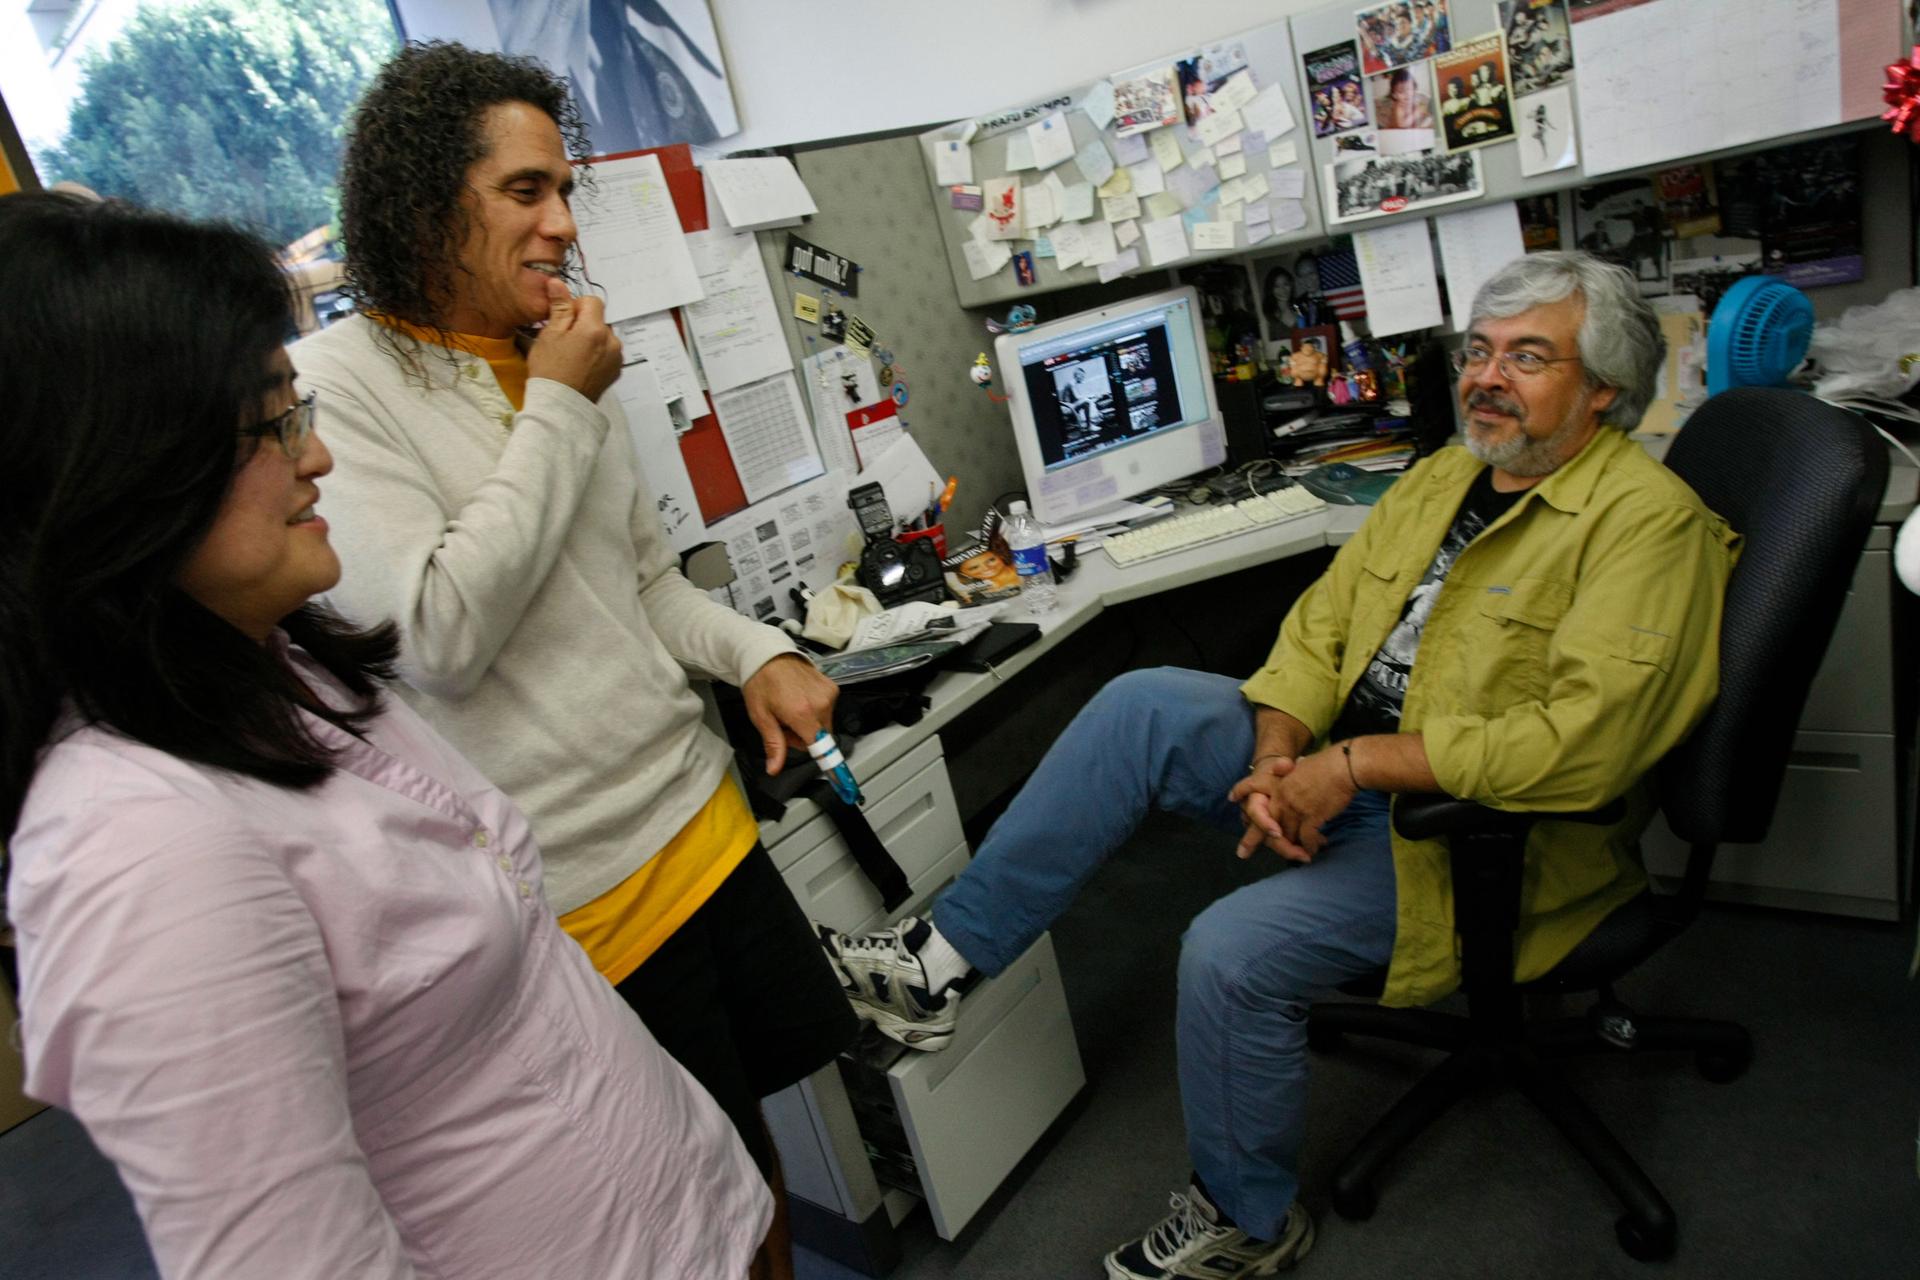 (Left to right) Gwen Muranaka, Mikey Hirano Culross and Mario Reyes, in the newsroom of the last remaining Japanese American daily newspaper, the Rafu Shimpo in downtown Los Angeles, 2010.